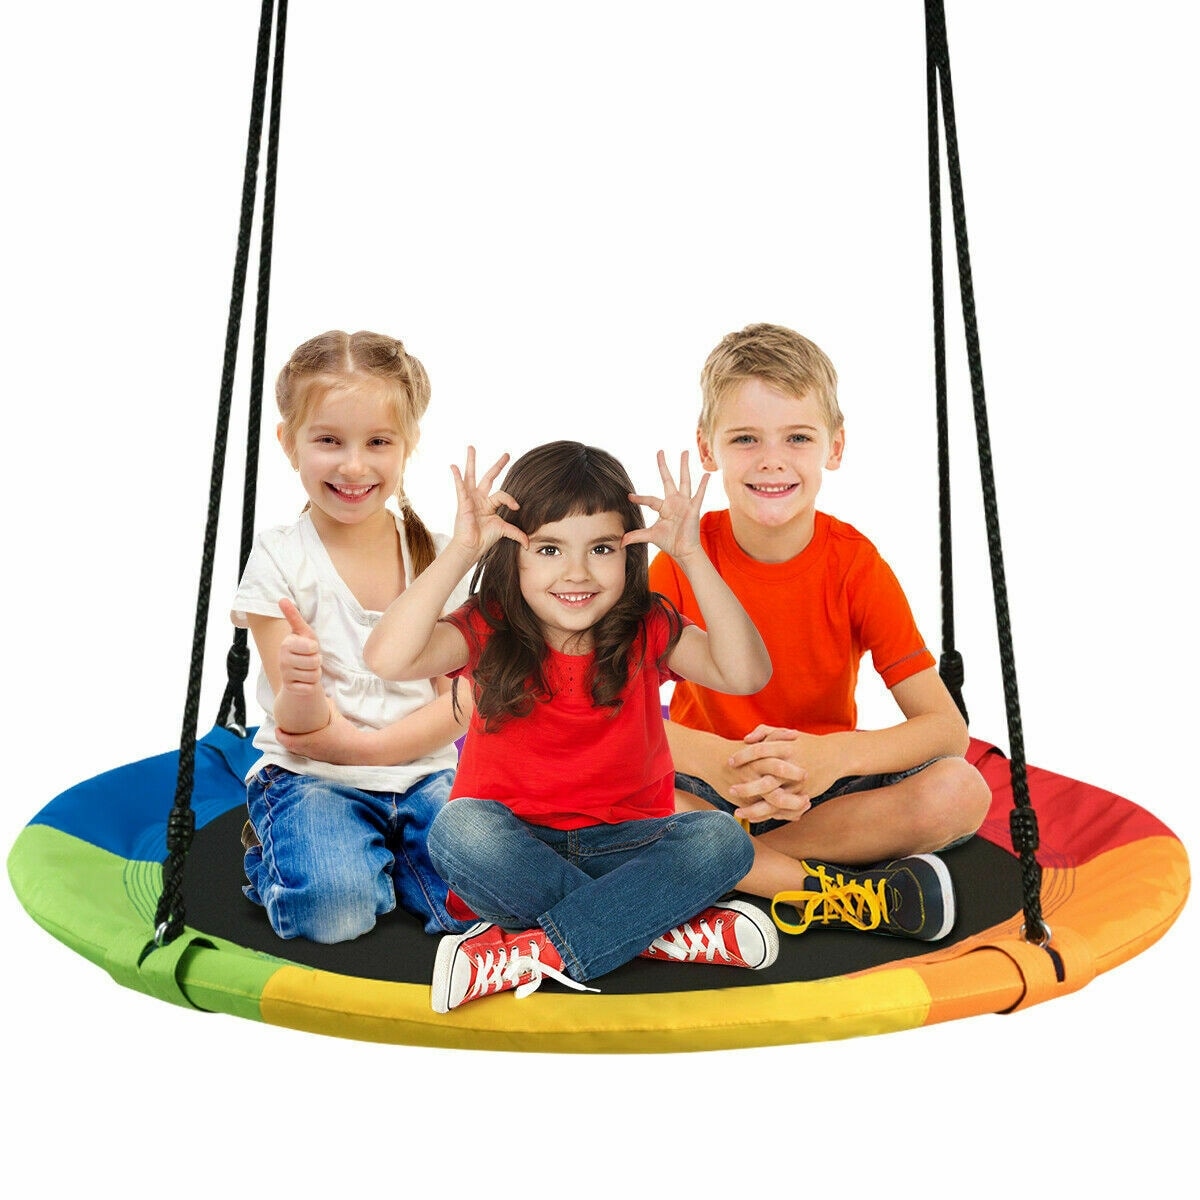 Outdoor Saucer Rope Swing Platform Swing for Kid Round Swingset wirh Adjustable Hanging Ropes for Indoor Backyard and Playground Color Odoland 24 inch Children Tree Swing SwingSeat 